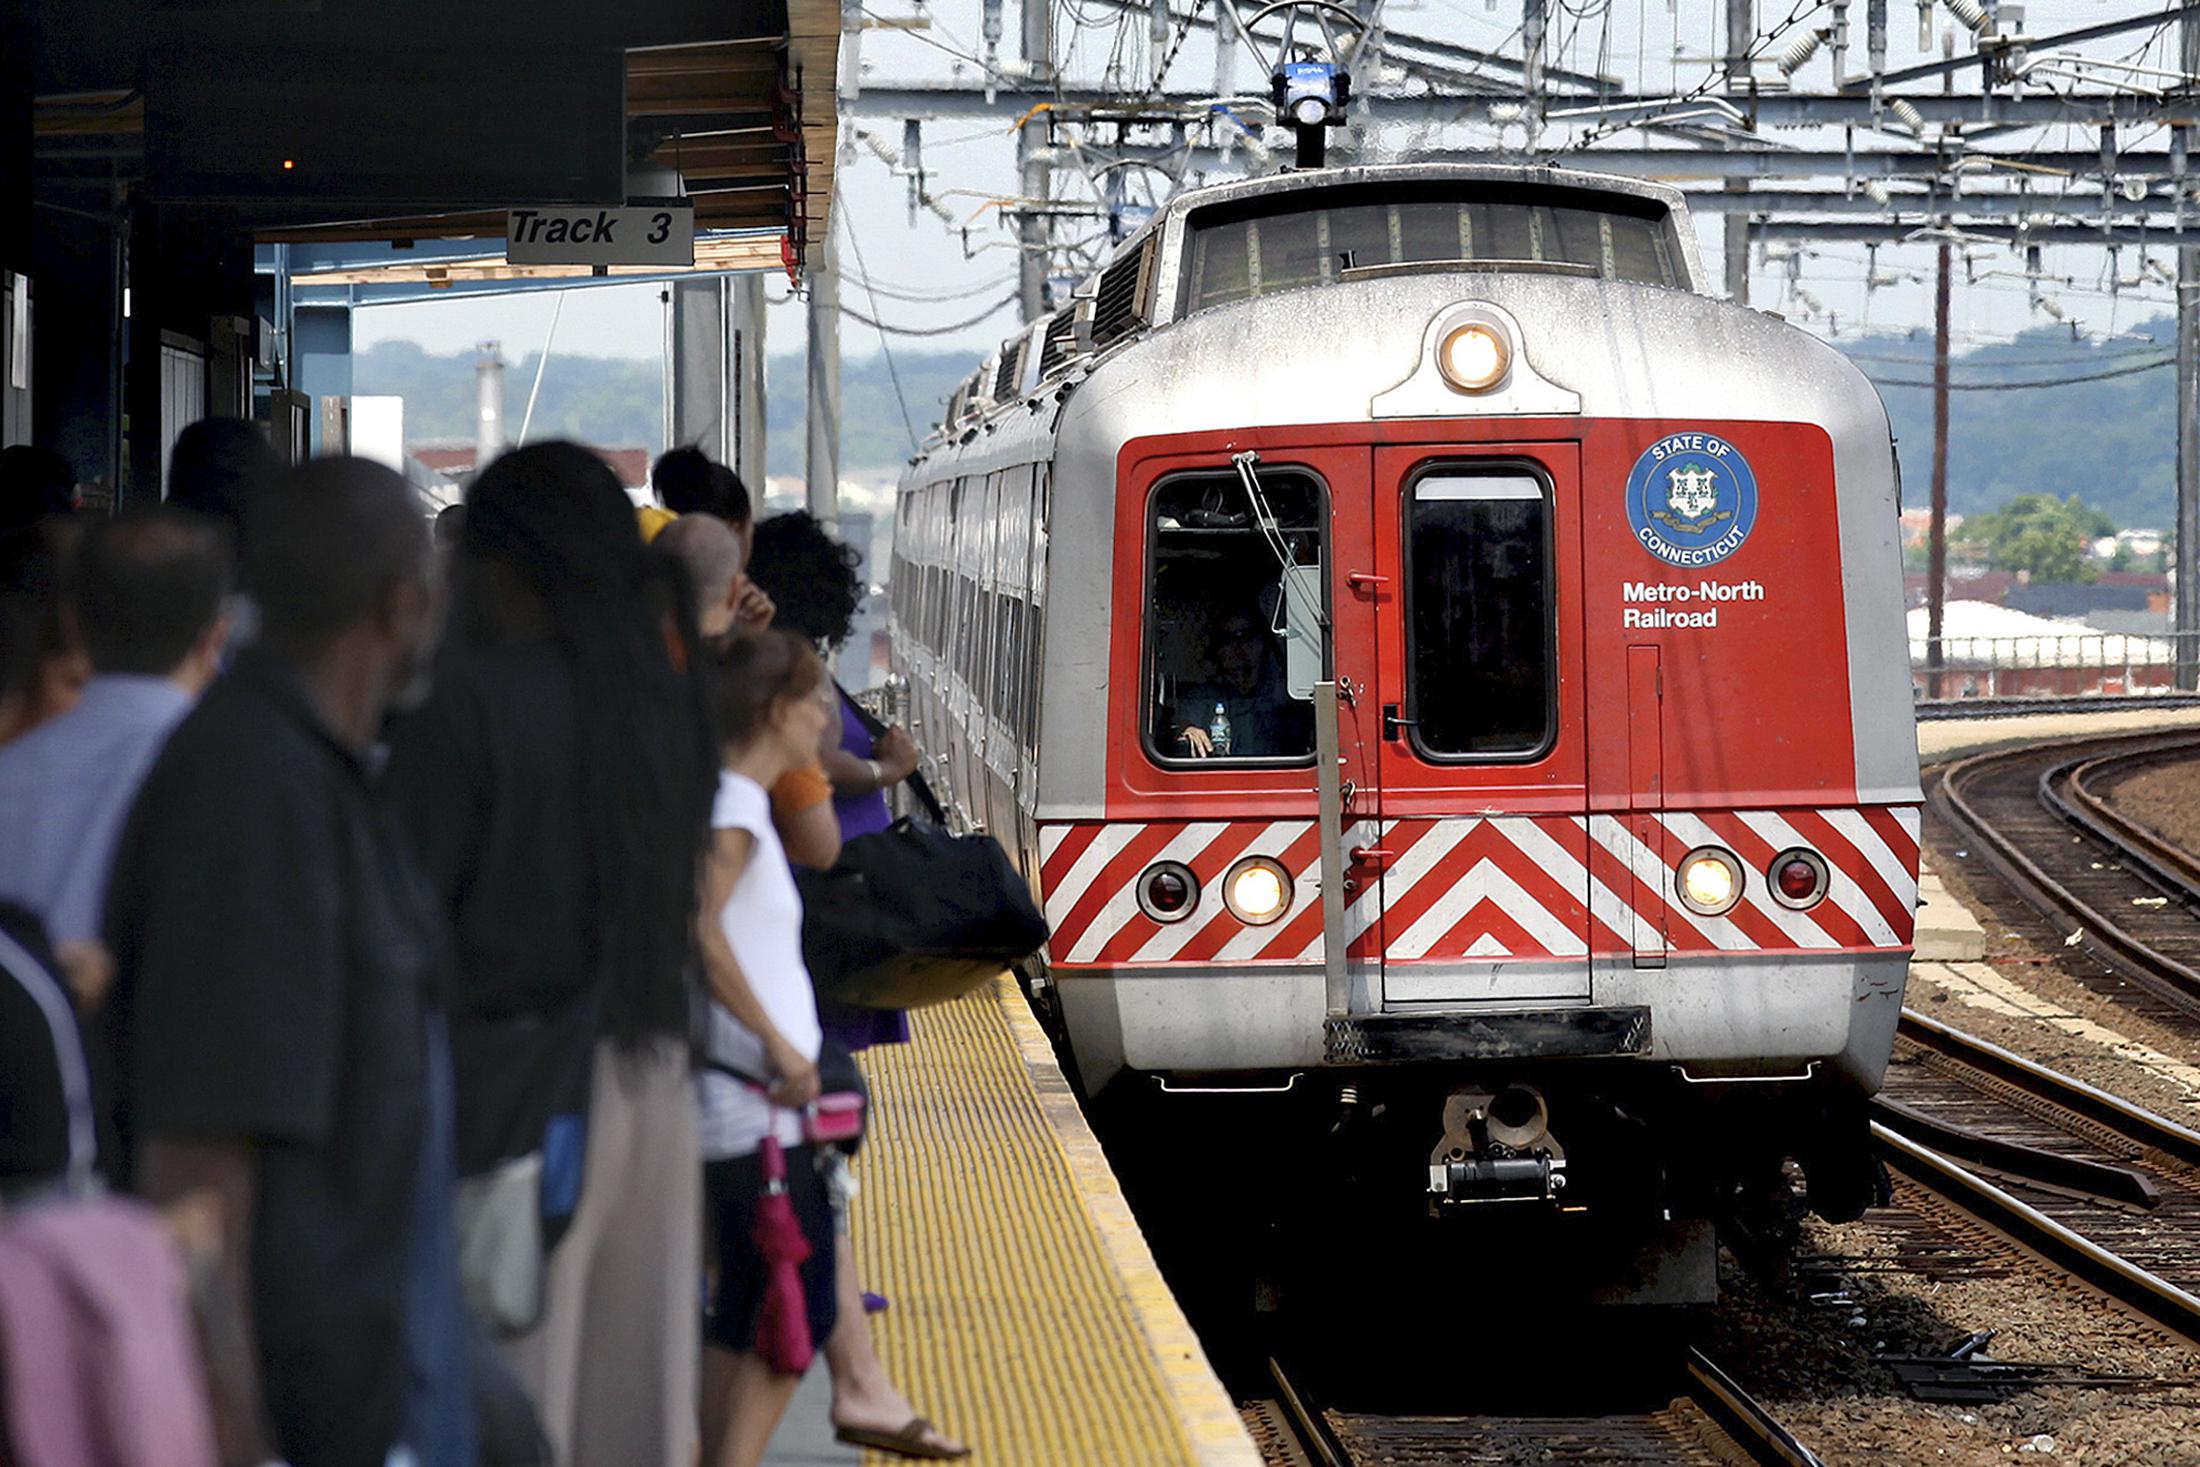 Connecticut boosts MetroNorth service as ridership improves AP News